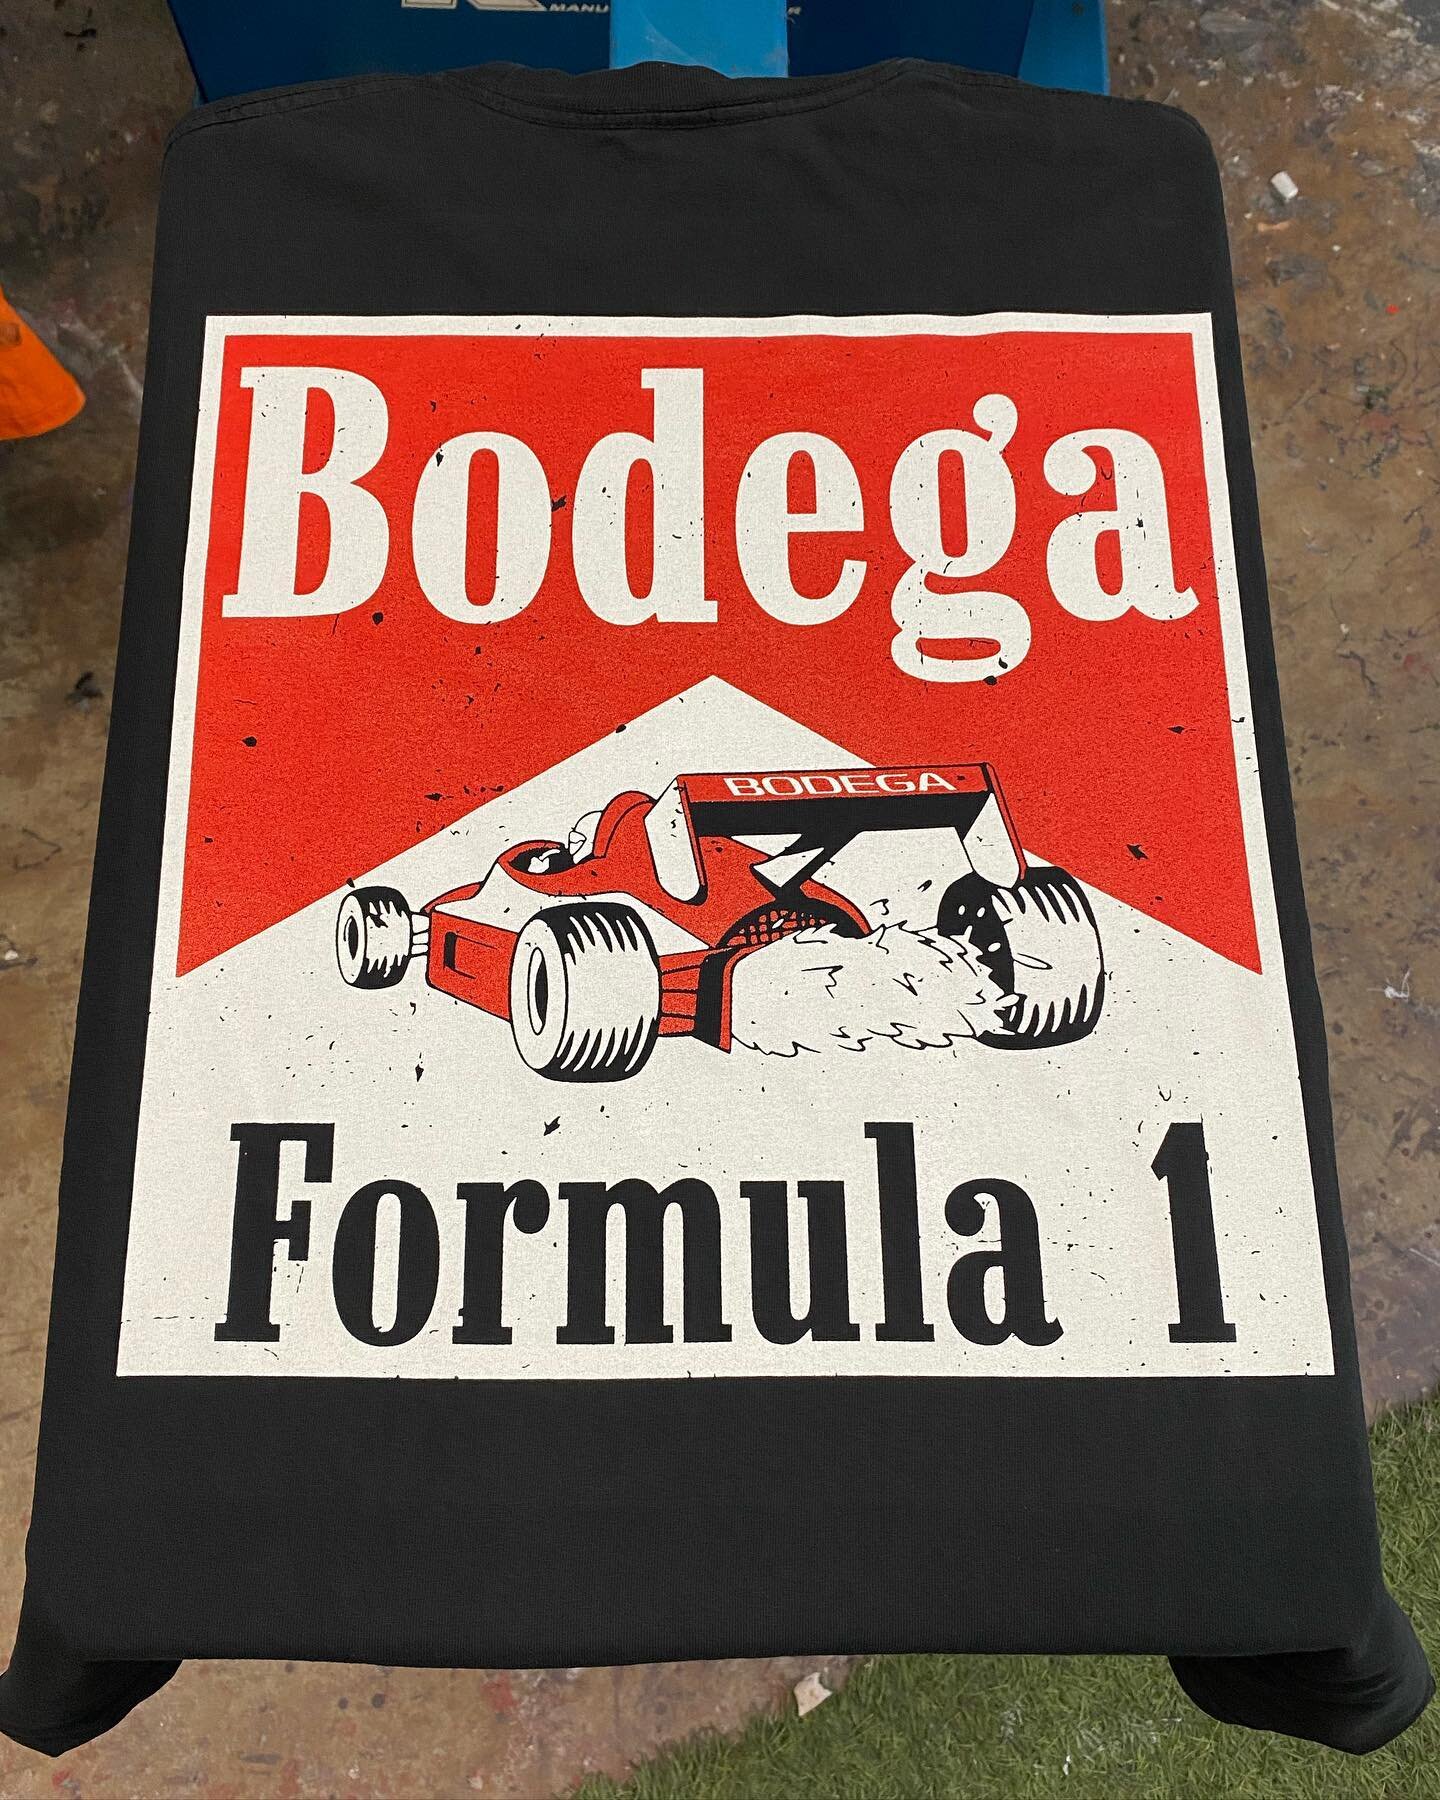 Check out this oversized print for @bodegataqueria !!! It was an amazing time knocking these out for their F1 vibes!
&bull;
&bull;
#miamiscreenprinting #screenprinting #formula1miami #craftmanship